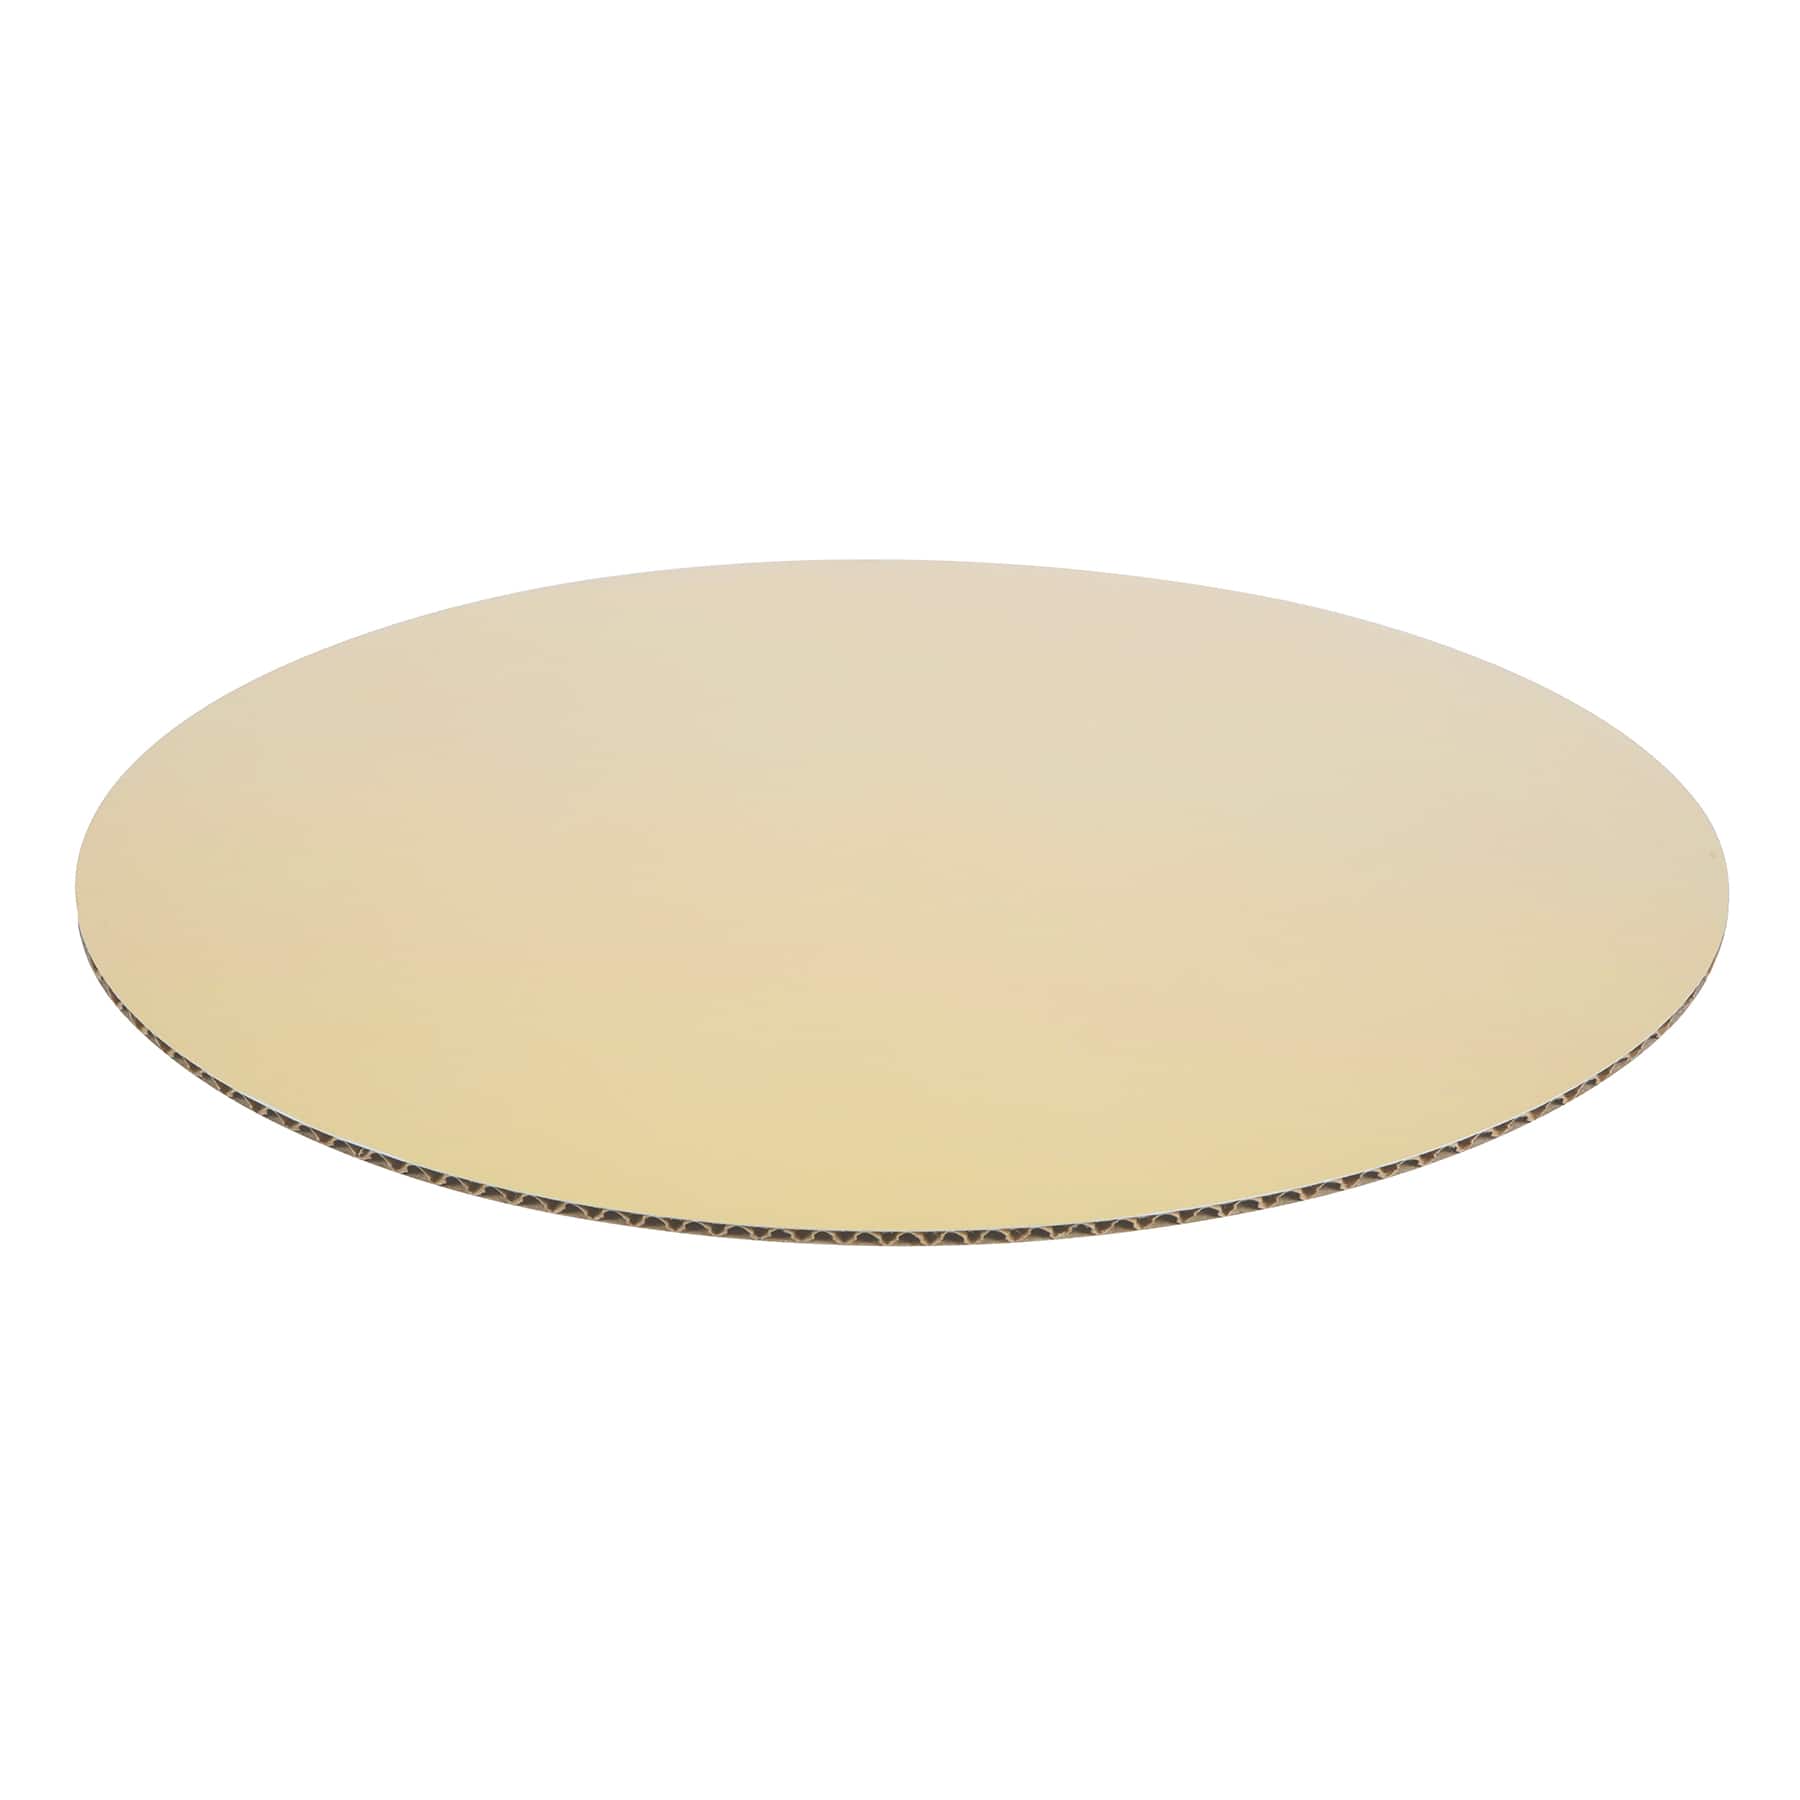 Rose Gold Round Cake Stand Hire - Dress It Yourself